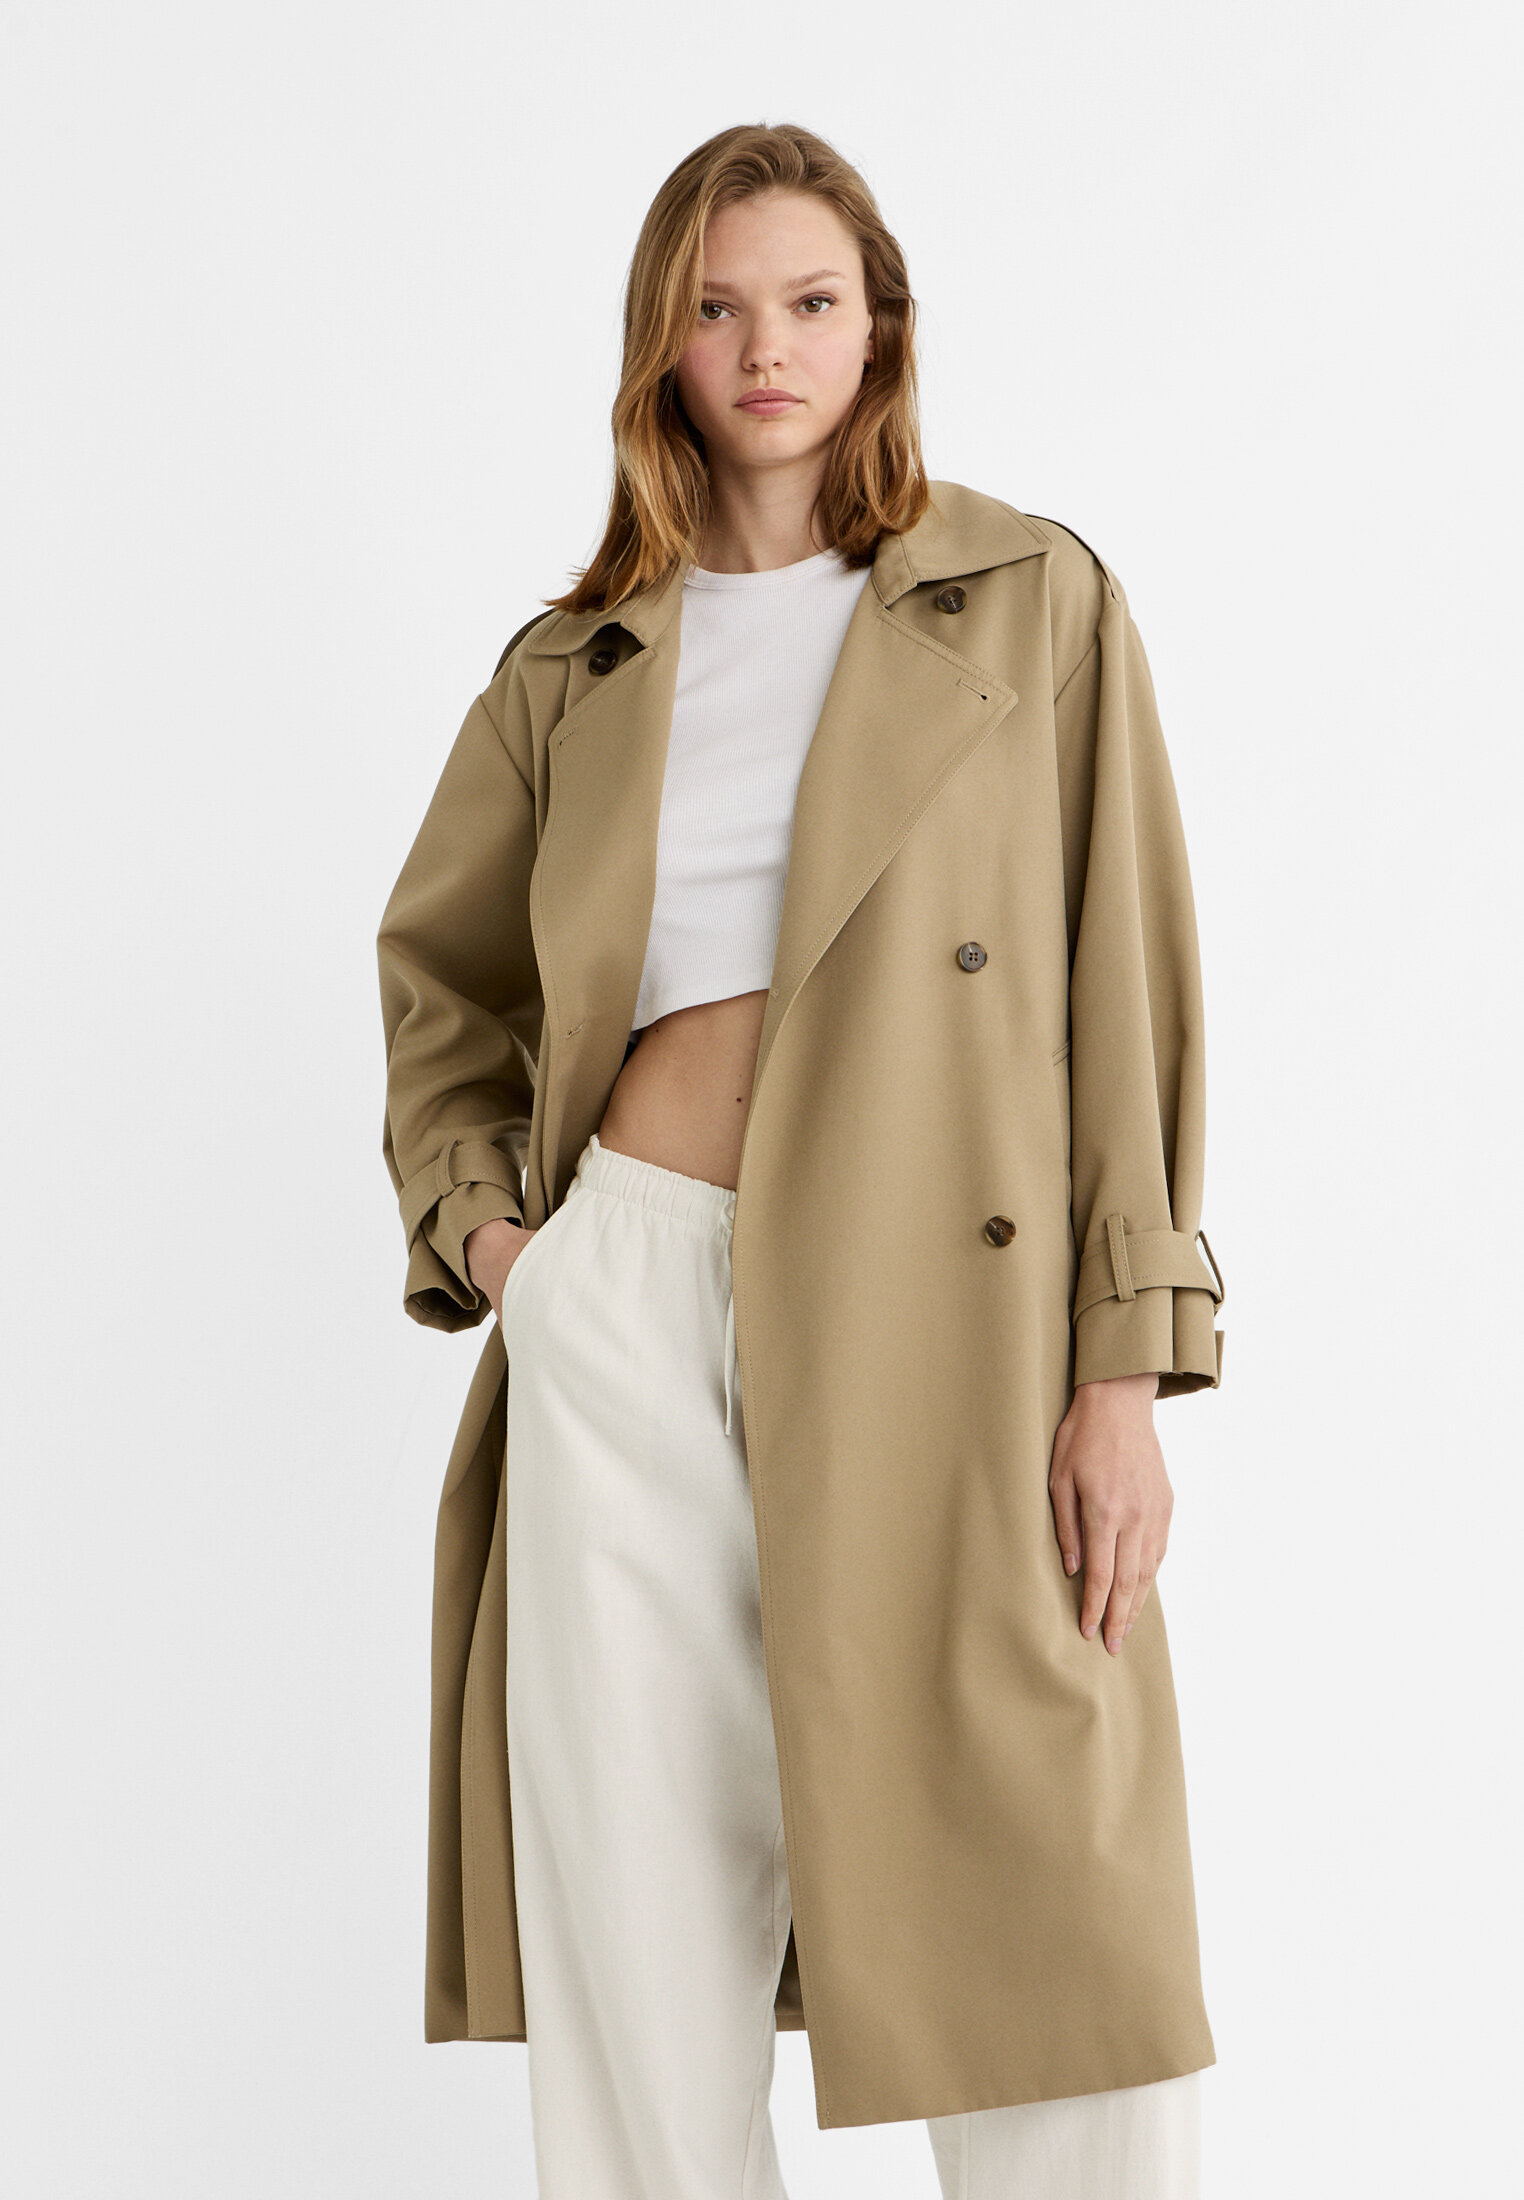 Long flowing lined trench coat - Women's fashion | Stradivarius 